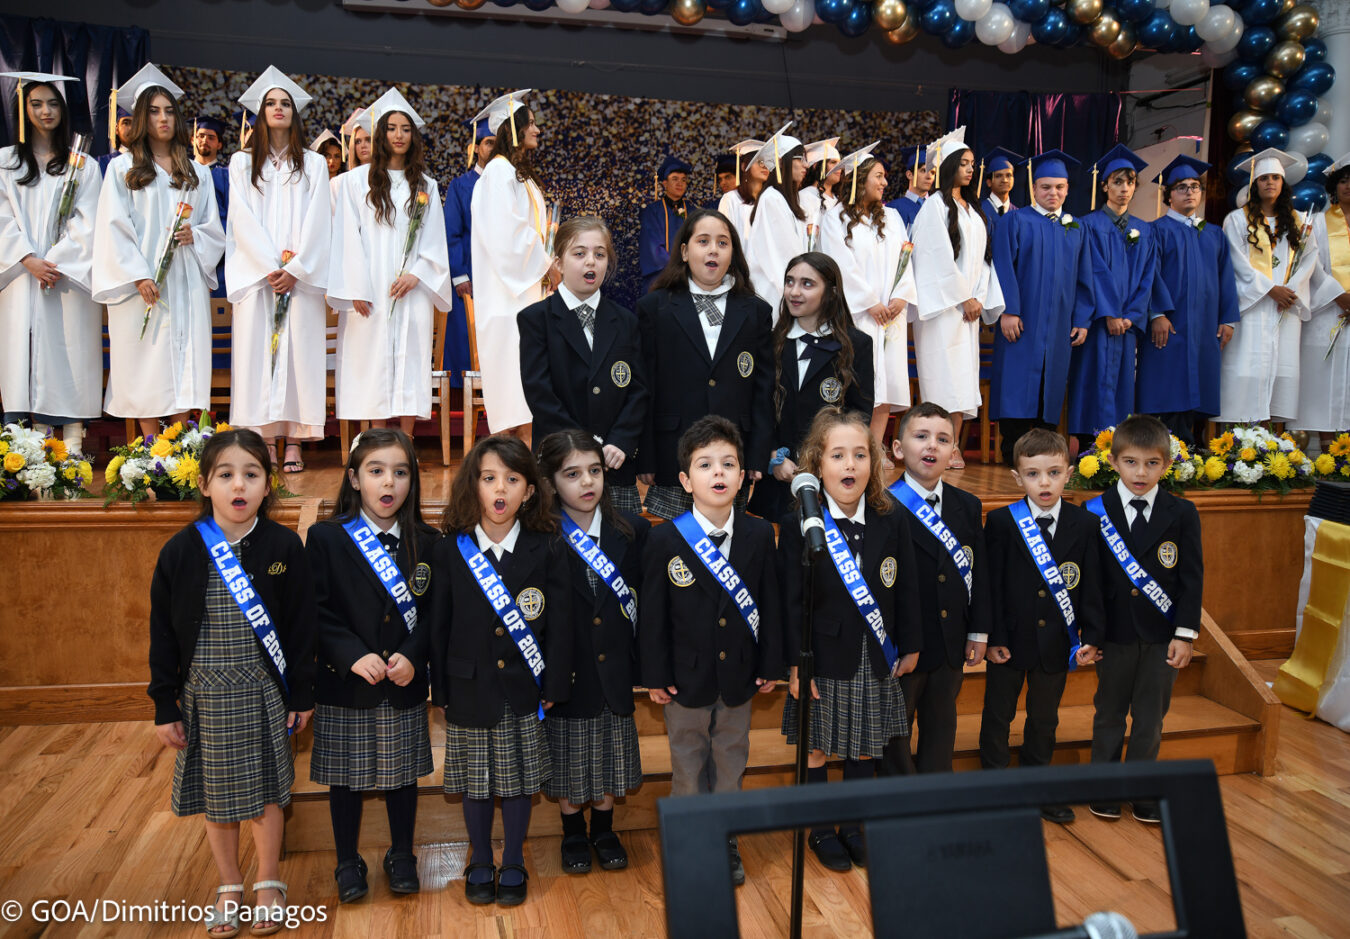 Graduation Day for the Class of 2023 at Saint Demetrios School in